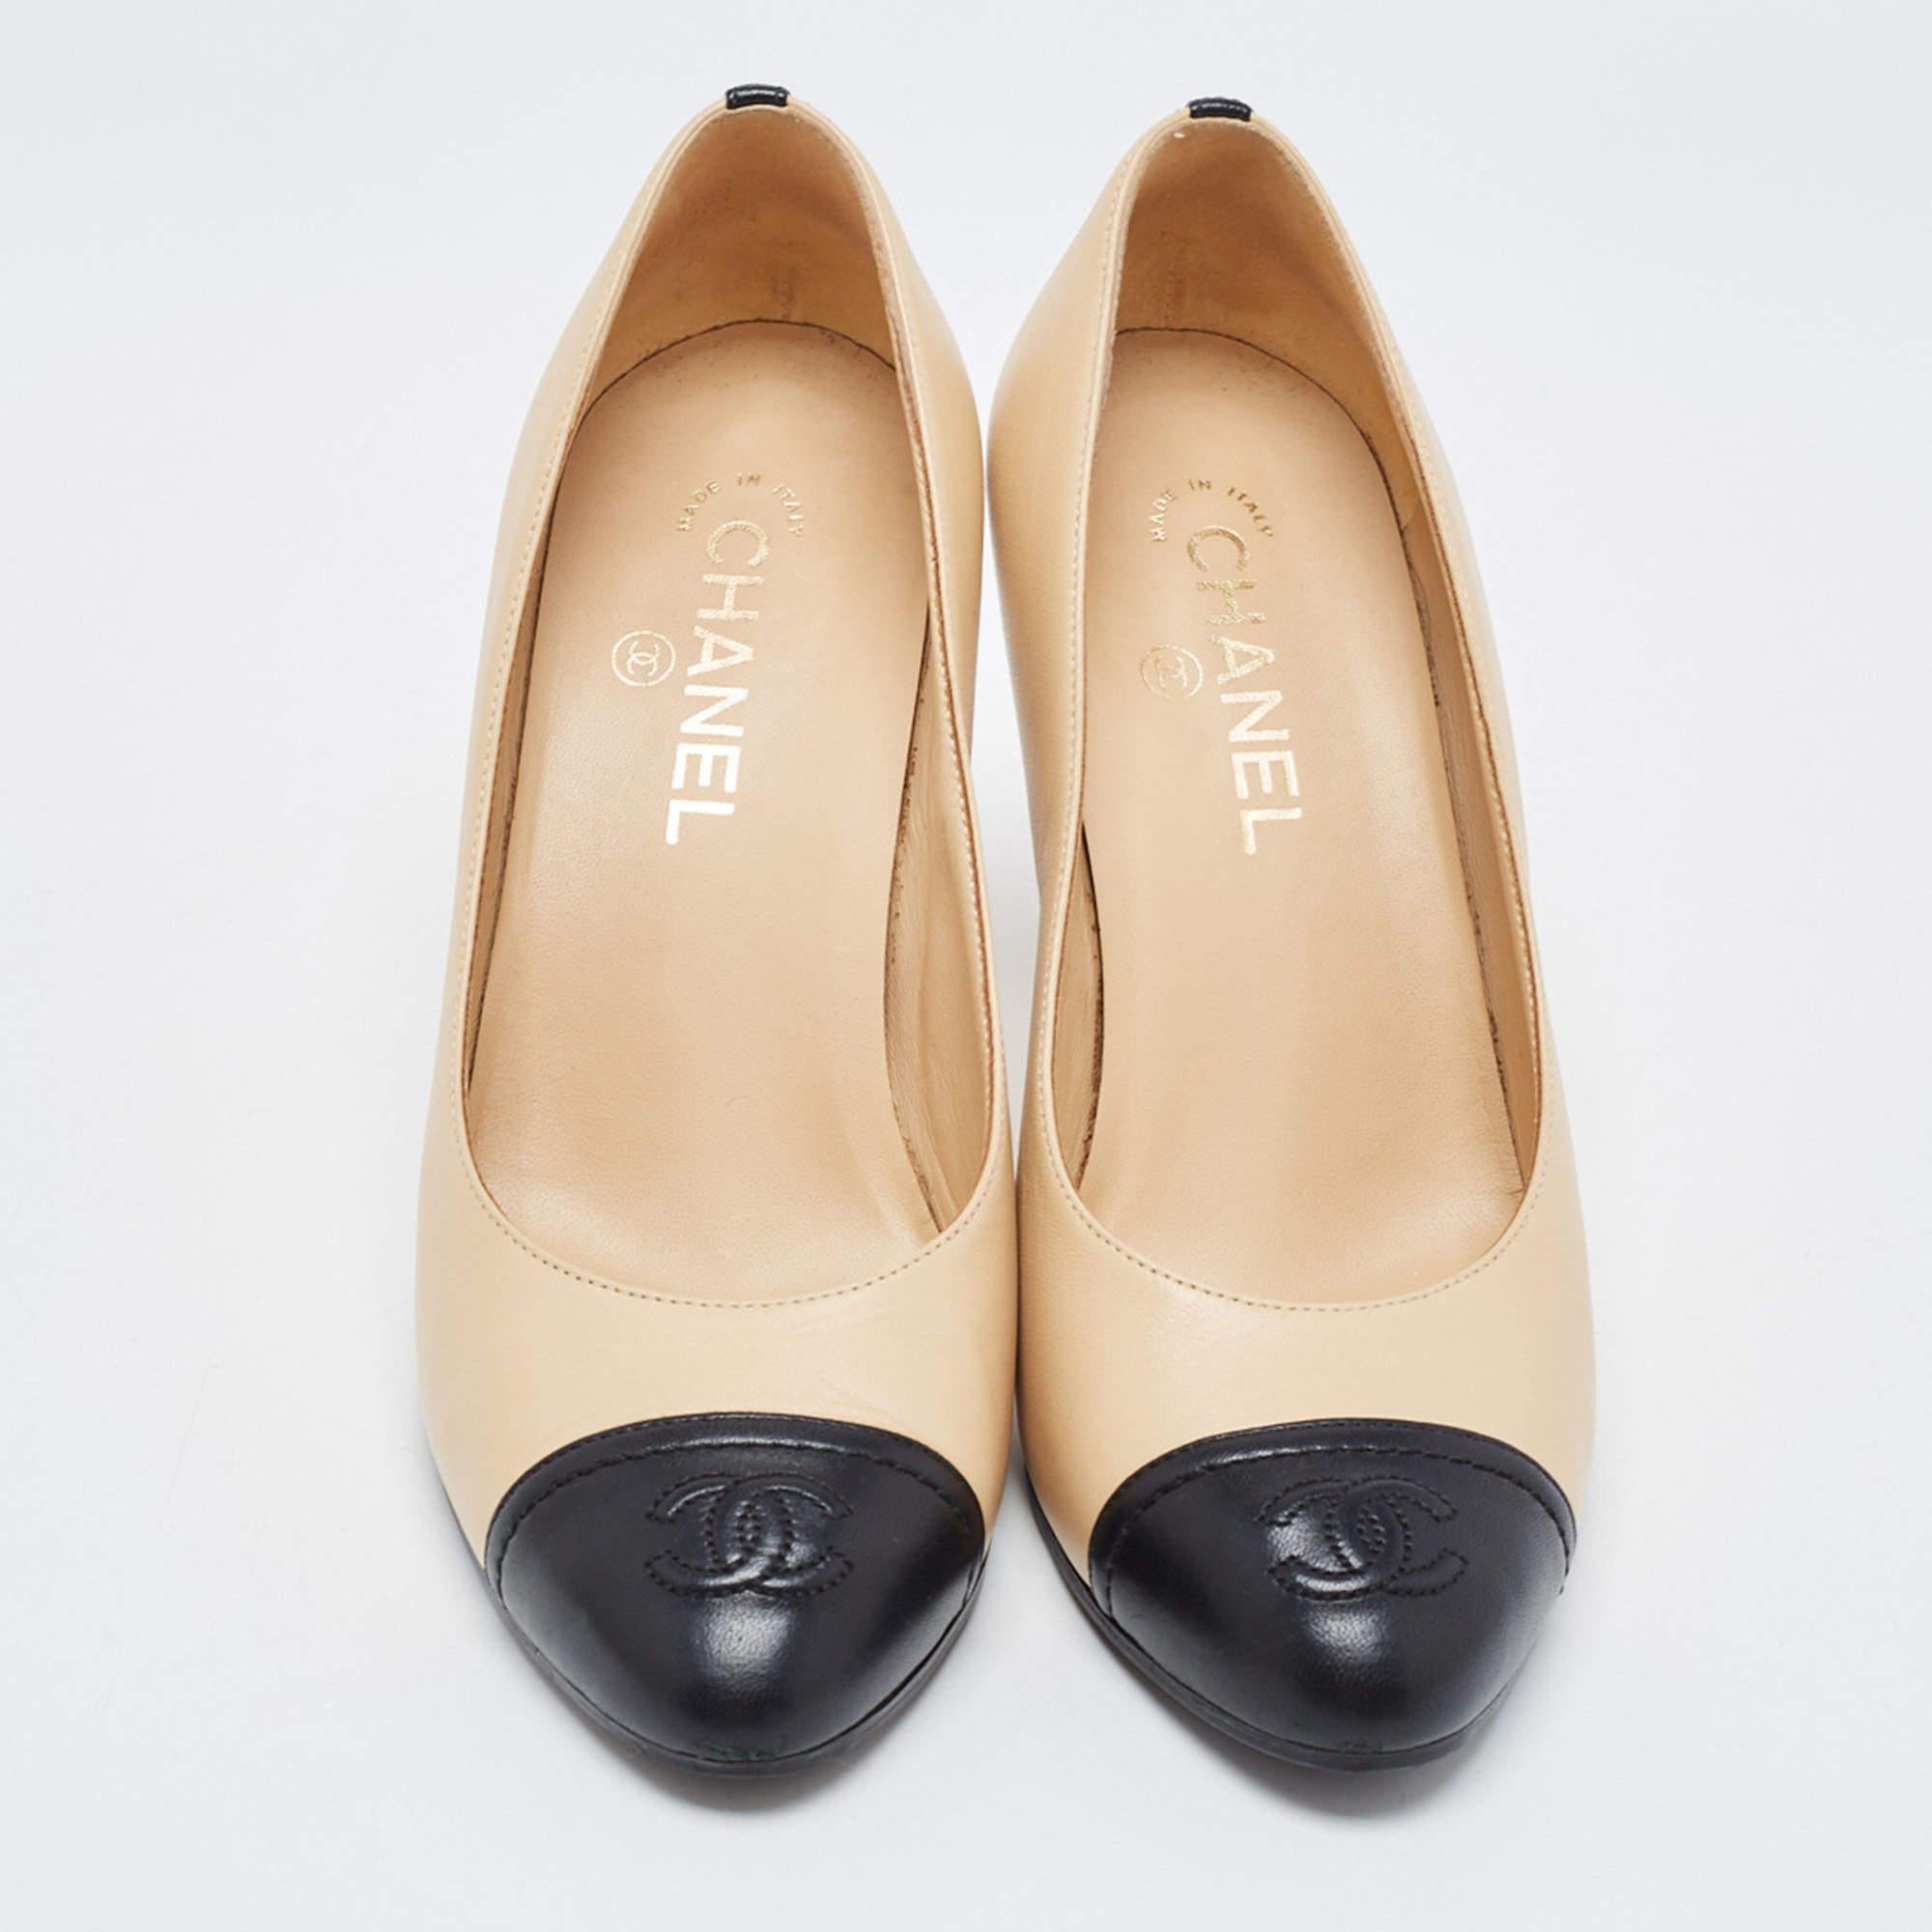 Designed for fashion queens like you, these Chanel pumps are crafted from leather and are absolutely gorgeous! They come flaunting cap toes, high heels, and sturdy soles.

includes
Original Box, Info Booklet